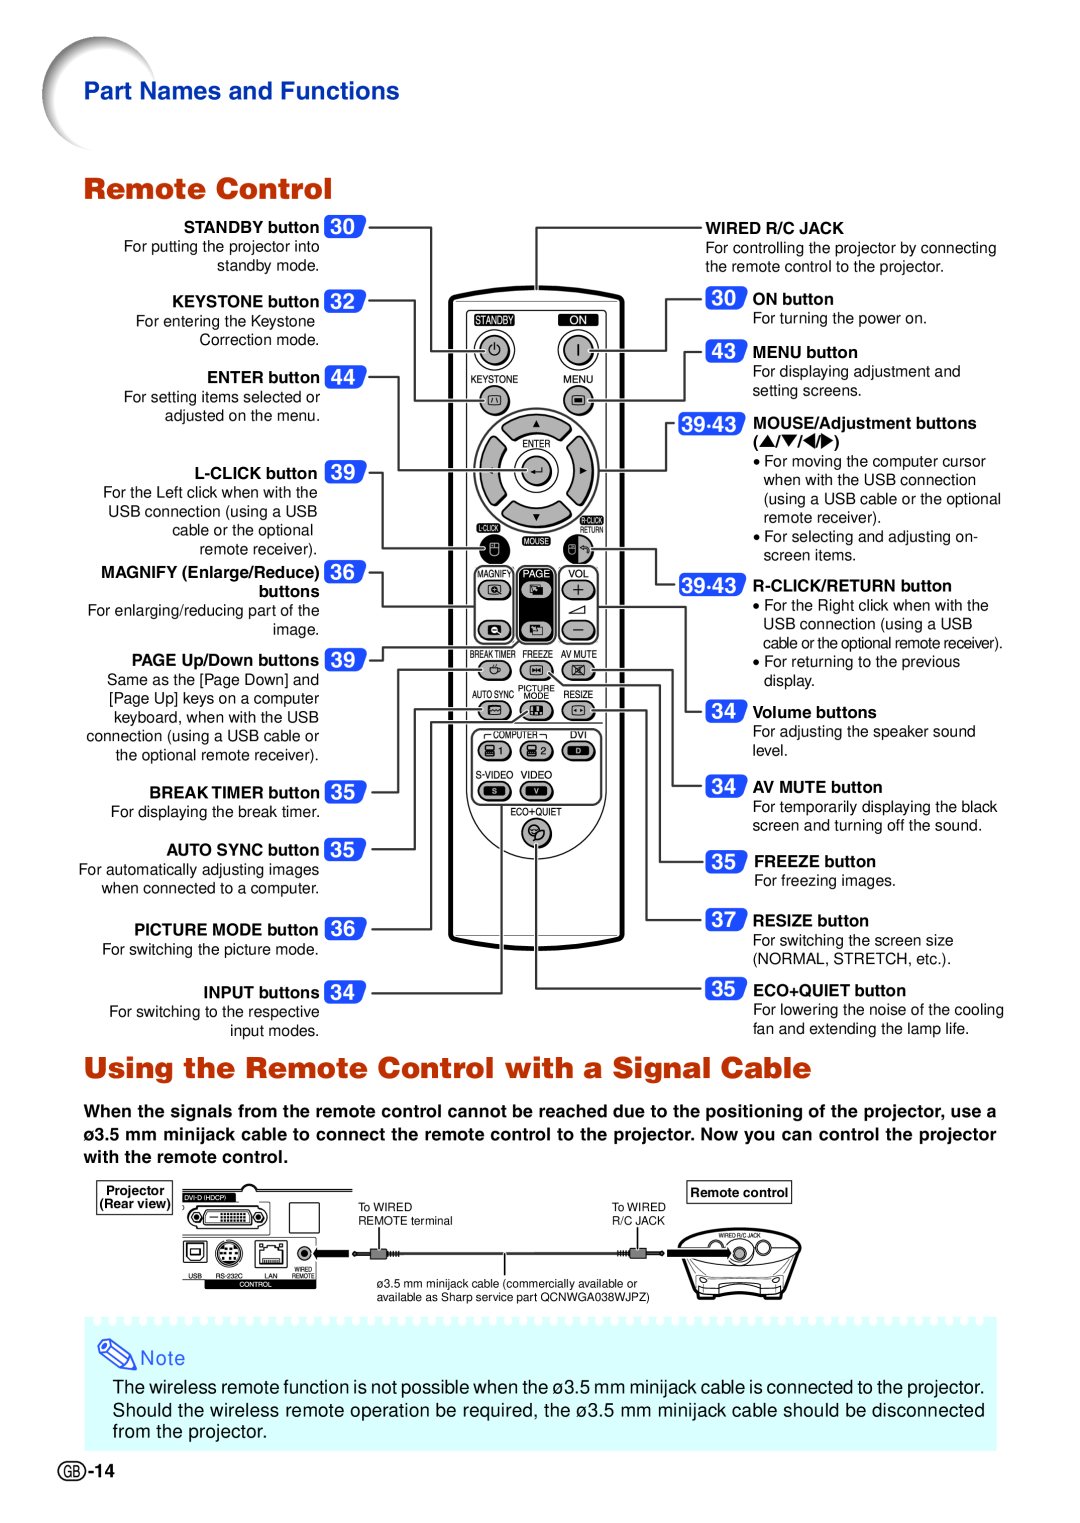 Sharp XG-C465X-L, XG-C435X-L operation manual Using the Remote Control with a Signal Cable, Part Names and Functions 